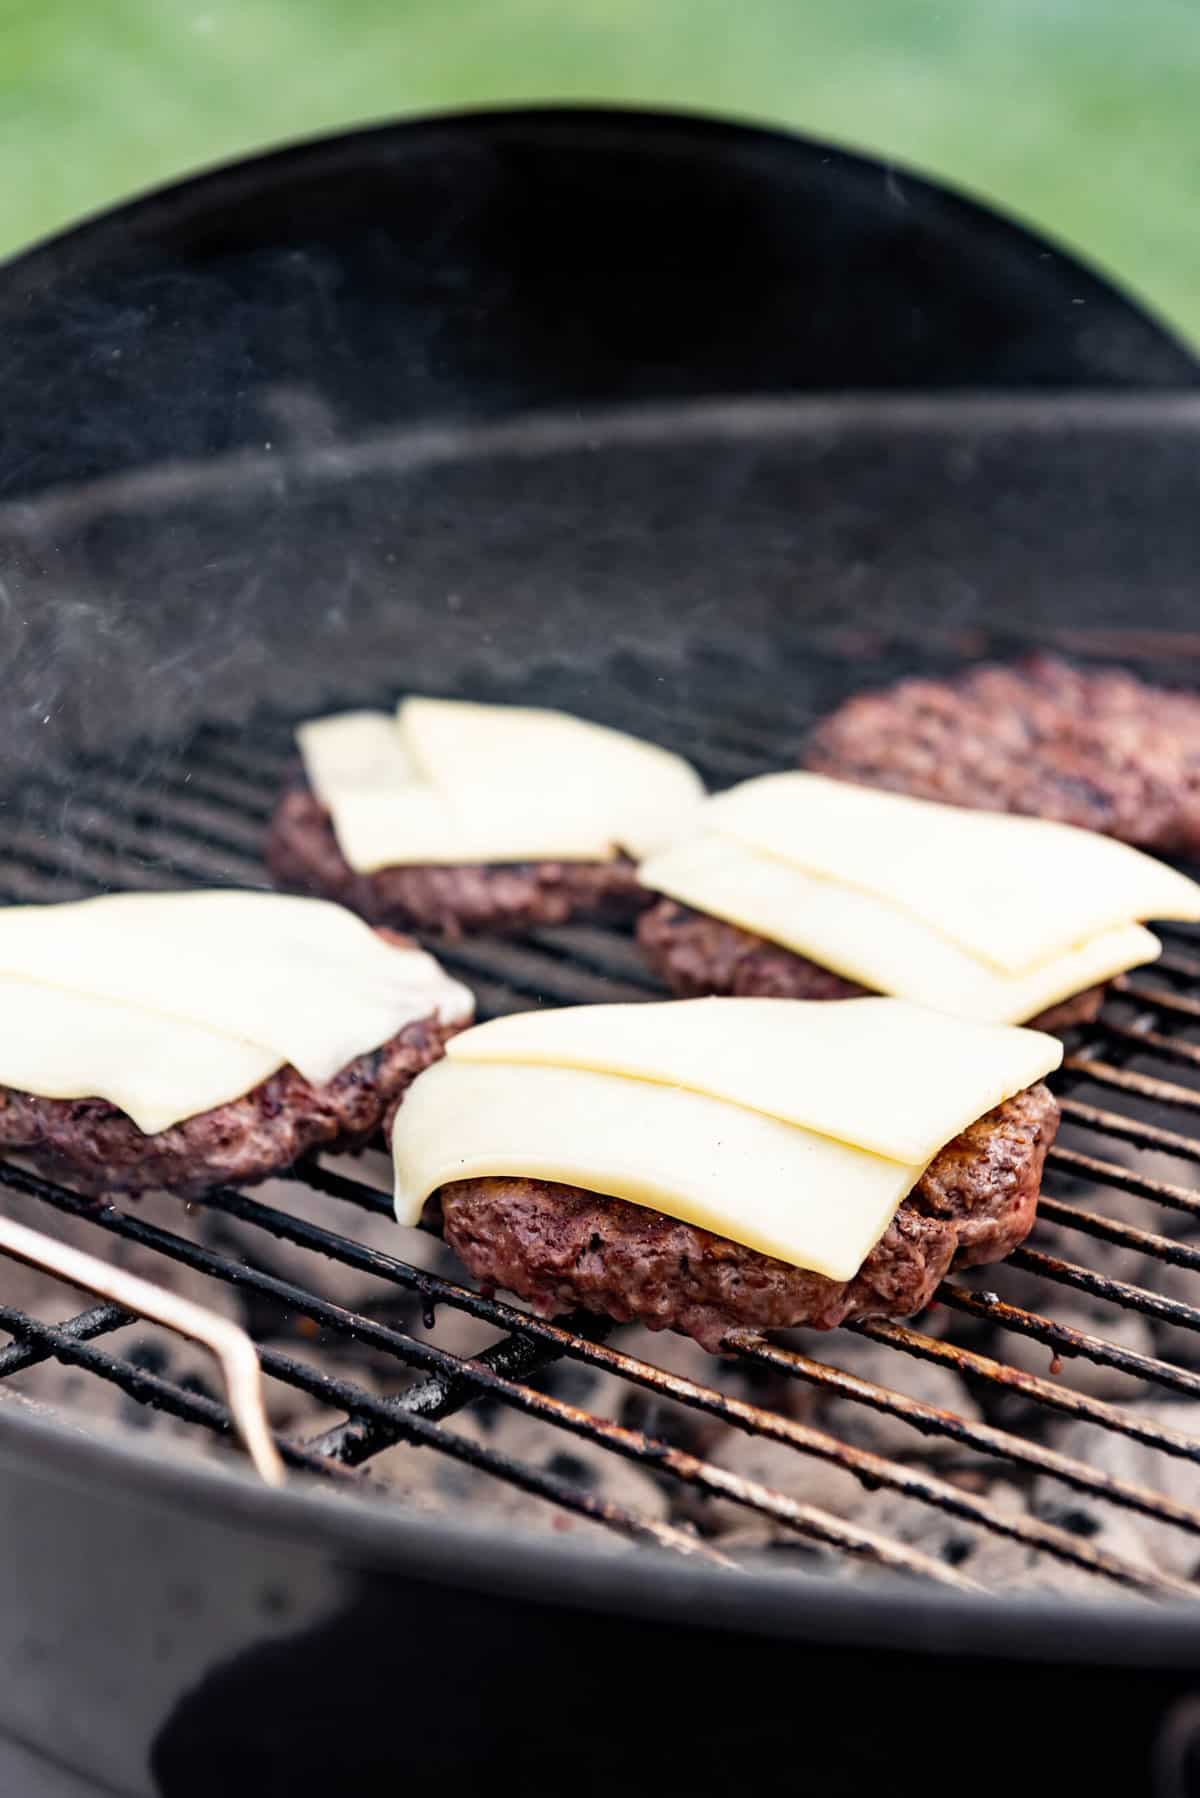 Adding cheese slices to burgers on the grill.